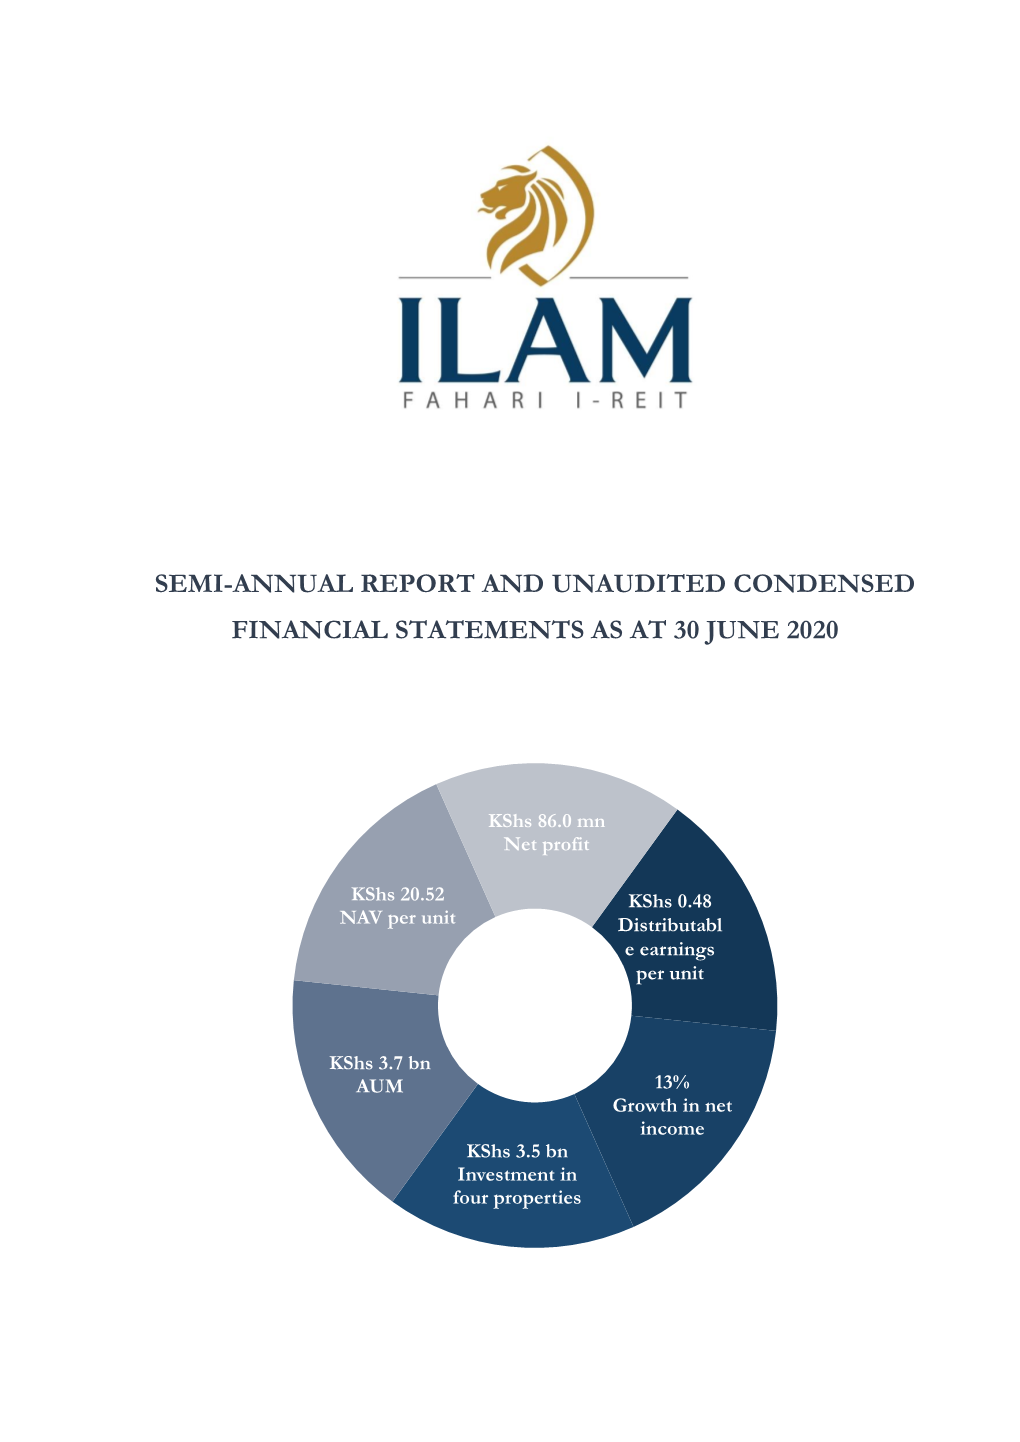 Semi-Annual Report and Unaudited Condensed Financial Statements As at 30 June 2020